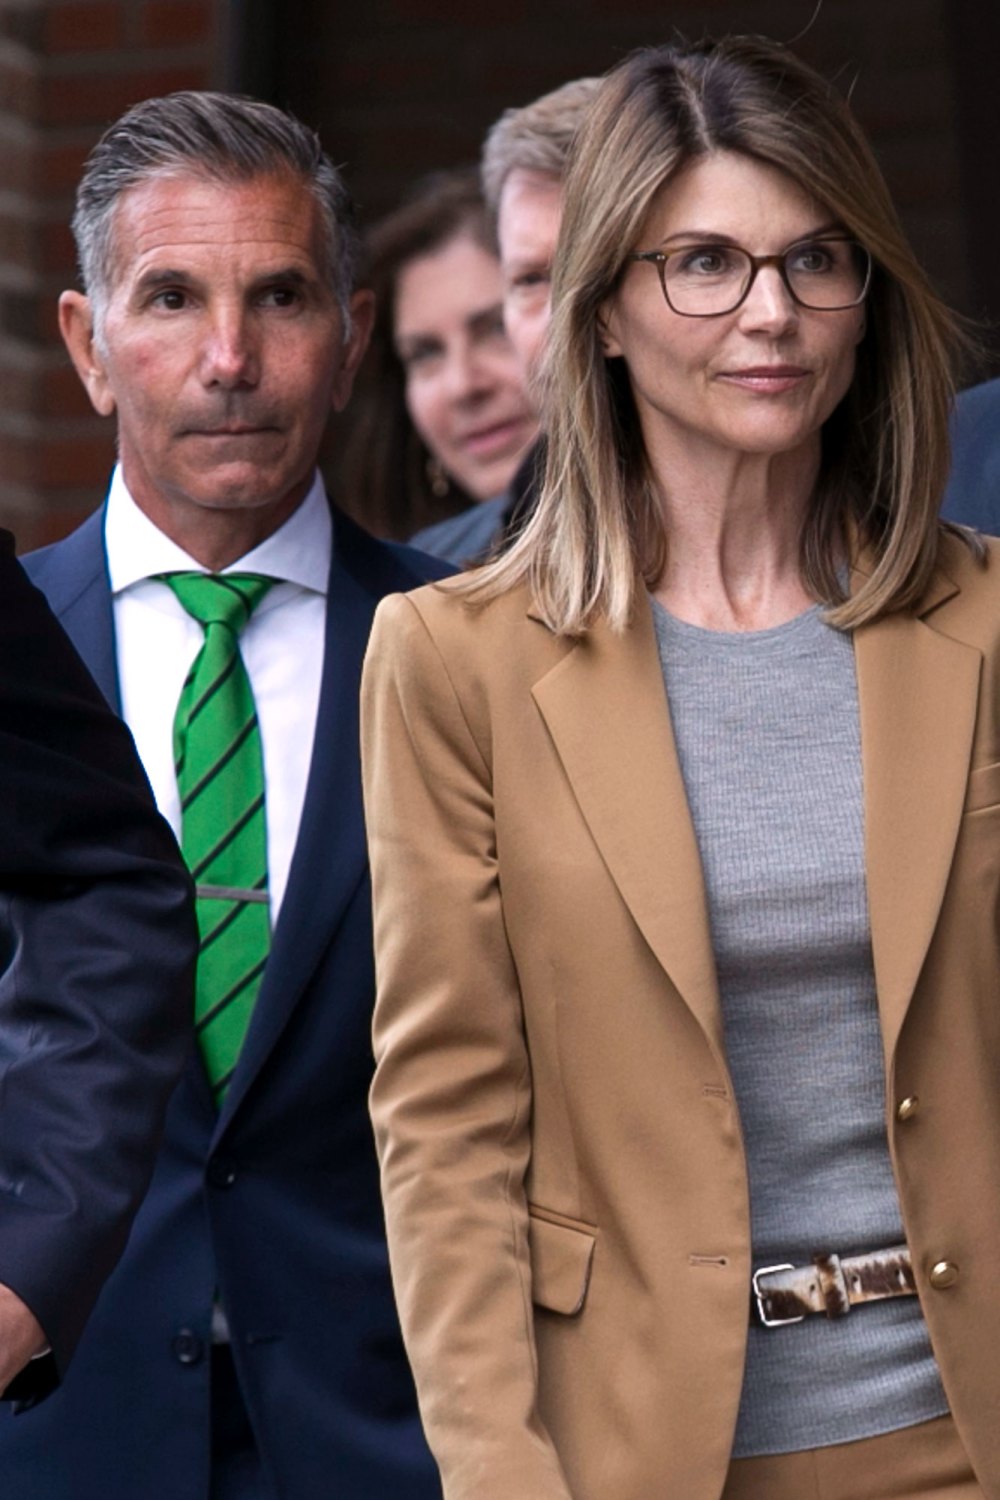 Lori Loughlin and Mossimo Giannulli Purchase Home Amid College Admissions Scandal